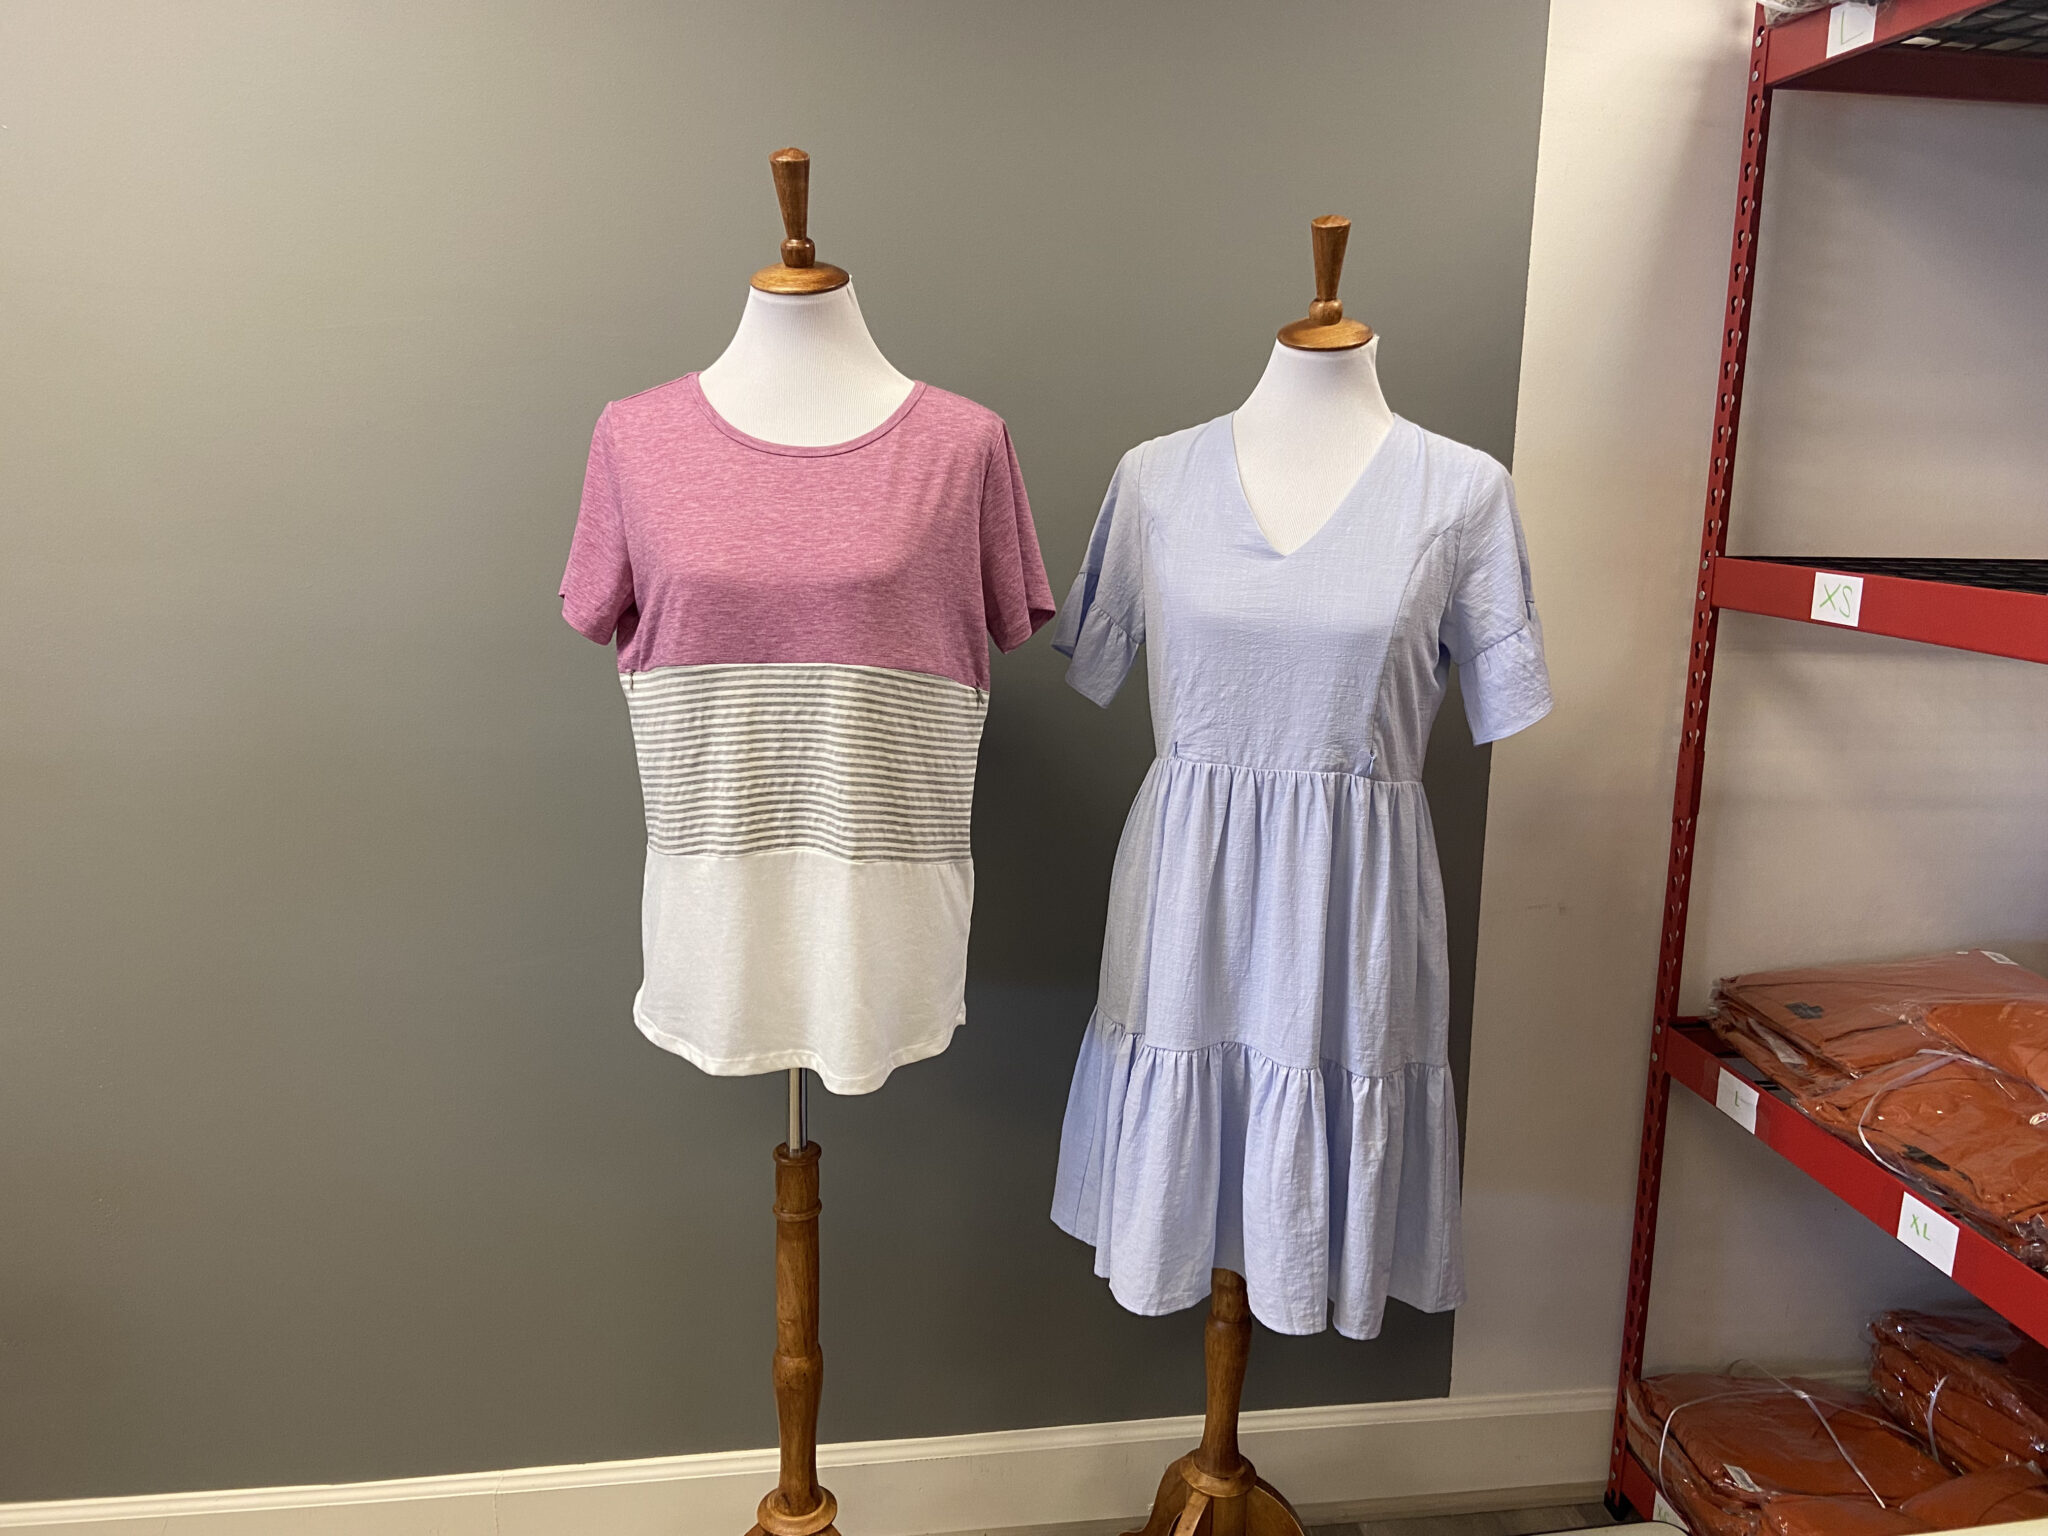 IMG 4313 Small biz Monday—Nursing Queen makes stylish, discreet and comfortable clothing options for nursing moms